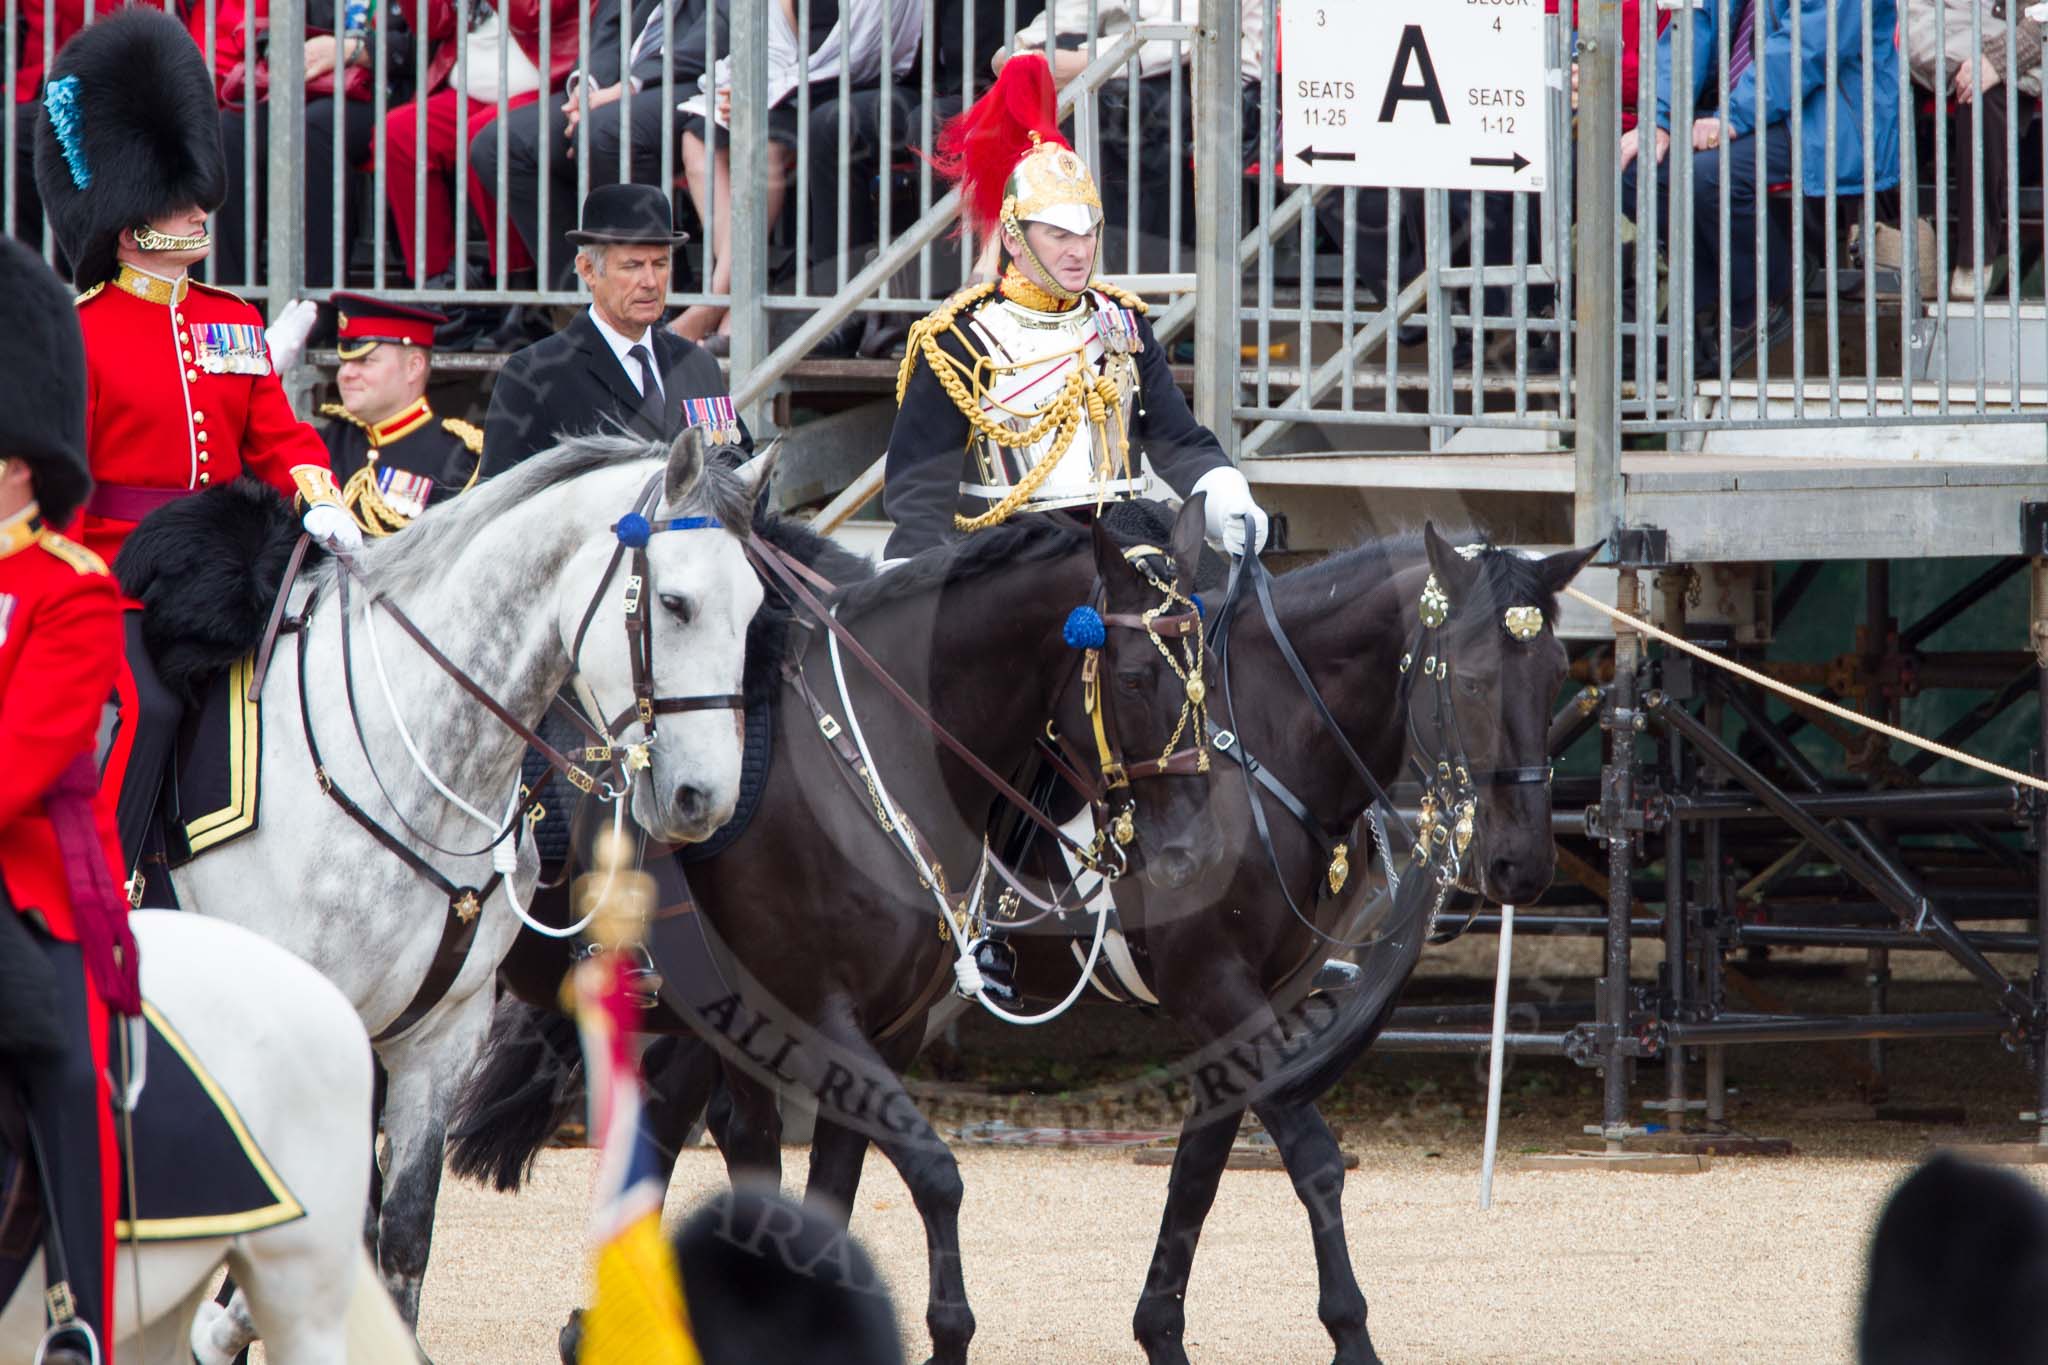 The Colonel's Review 2012: Representing the Royal Colonels (guessing here!): On the left, a Captain of the Irish Guards, riding the horse of the Duke of Cambridge, in the middle the Queen's Stud Groom, riding the Prince of Wales's horse, and on the right a Lieutenant Colonel of the Blues and Royal, riding the horse of the Princess Royal..
Horse Guards Parade, Westminster,
London SW1,

United Kingdom,
on 09 June 2012 at 10:57, image #148